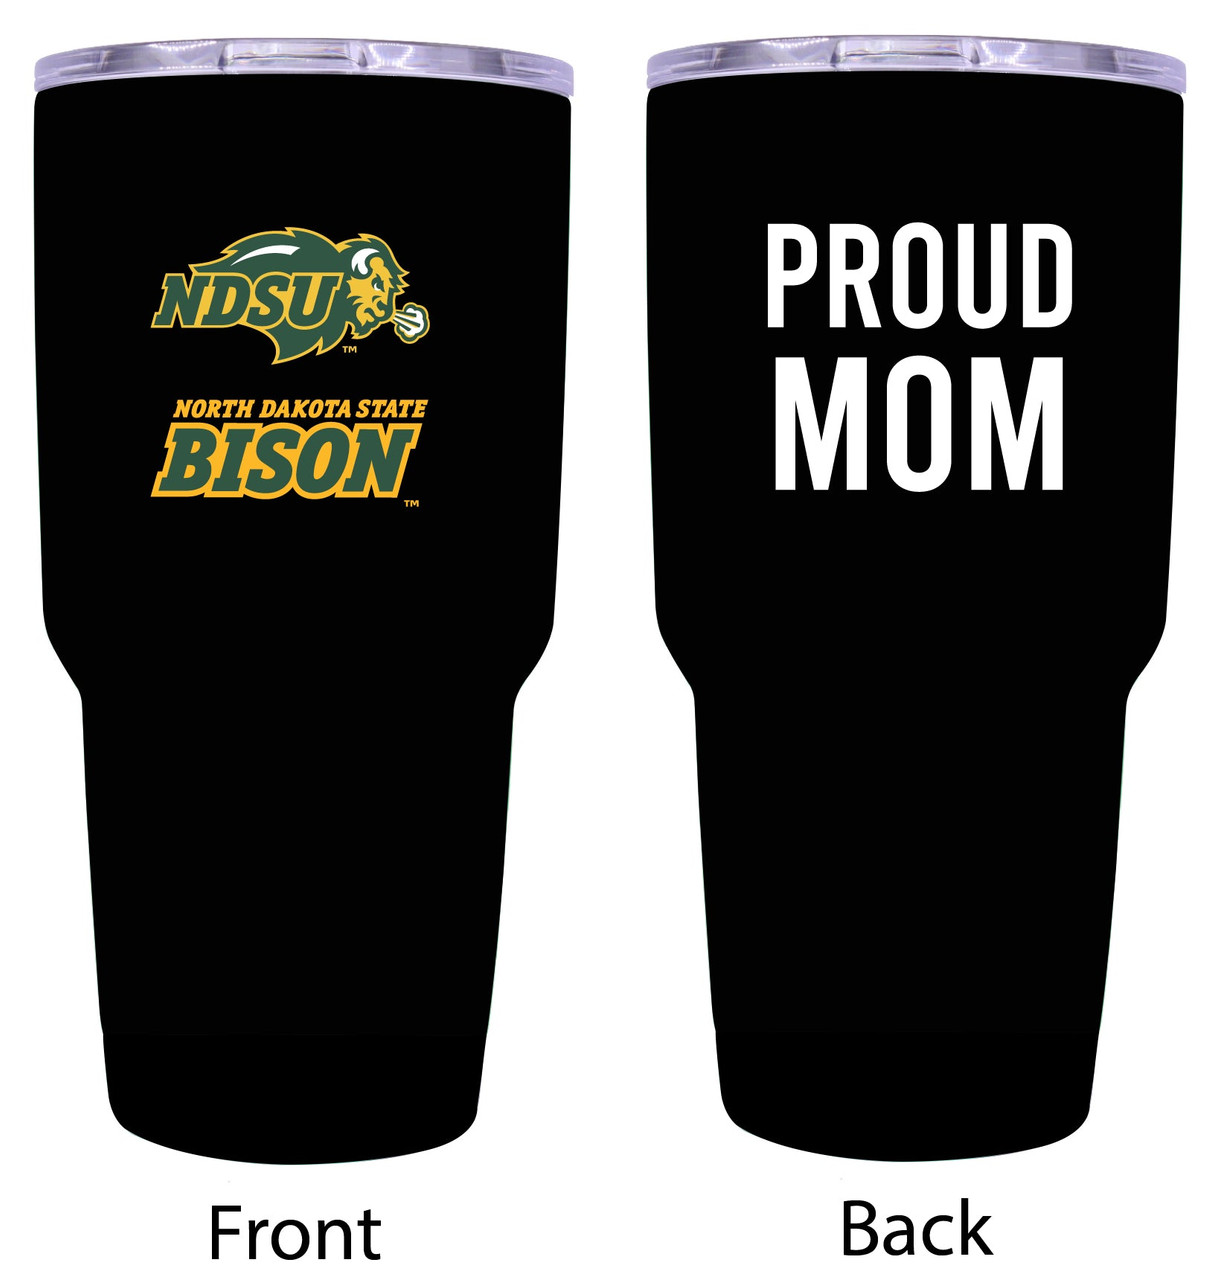 North Dakota State Bison Proud Mom 24 oz Insulated Stainless Steel Tumblers Choose Your Color.